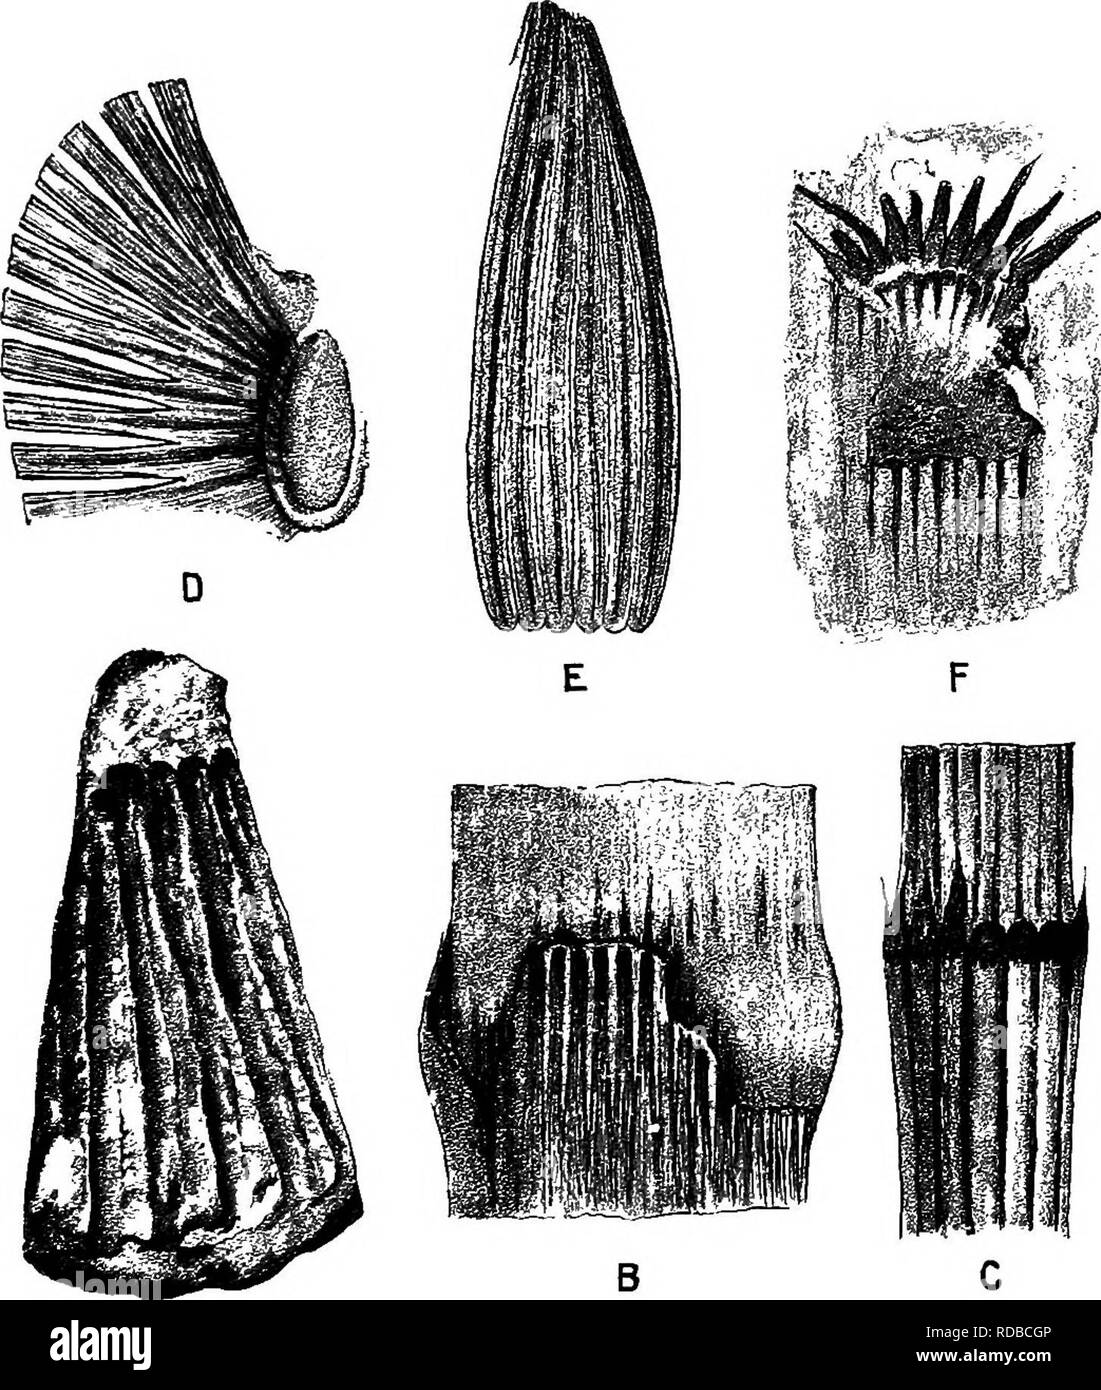 . Fossil plants : for students of botany and geology . Paleobotany. IX] EQUISETITES. 265 The portion of a leaf-sheath and a diaphragm represented in fig. 57,5, agrees closely with Zeiller's examples. This specimen is from the English Coal-Measures, but it is not advisable to. Fig. 58. A. Equisetites spatulatus, Zeill. Leaf-sheath. * nat. size. (After ZeiUer.) B. E. columnaris, Brongn. Prom a specimen in the British Museum. f nat. size. 0. Equisetum ramosissimum, Desf. x 2. D. Annulana stellata (Schloth.). Leaf-sheath. Slightly enlarged. (After Potonie.) E. Equisetites zeaeformis (Schloth.). Le Stock Photo